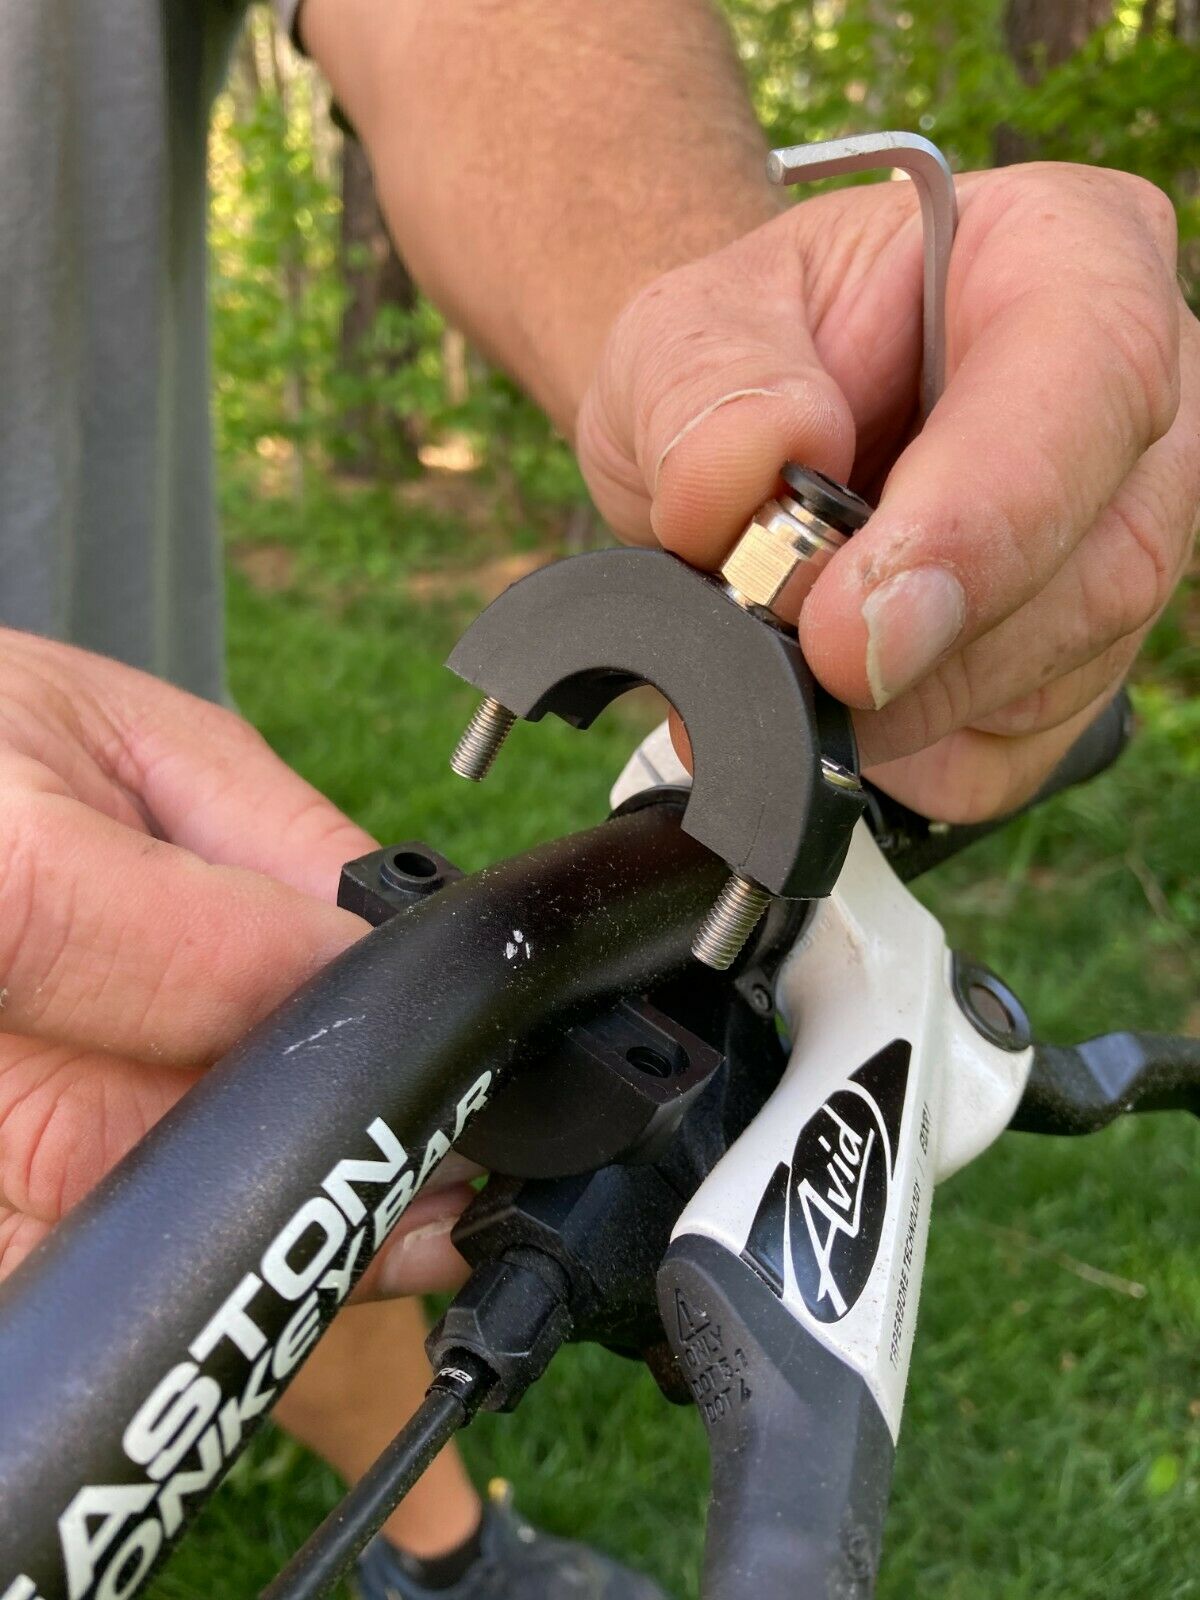 WebBuster Bicycle Spider Web Clearing Device – Tool-less Removal In Seconds